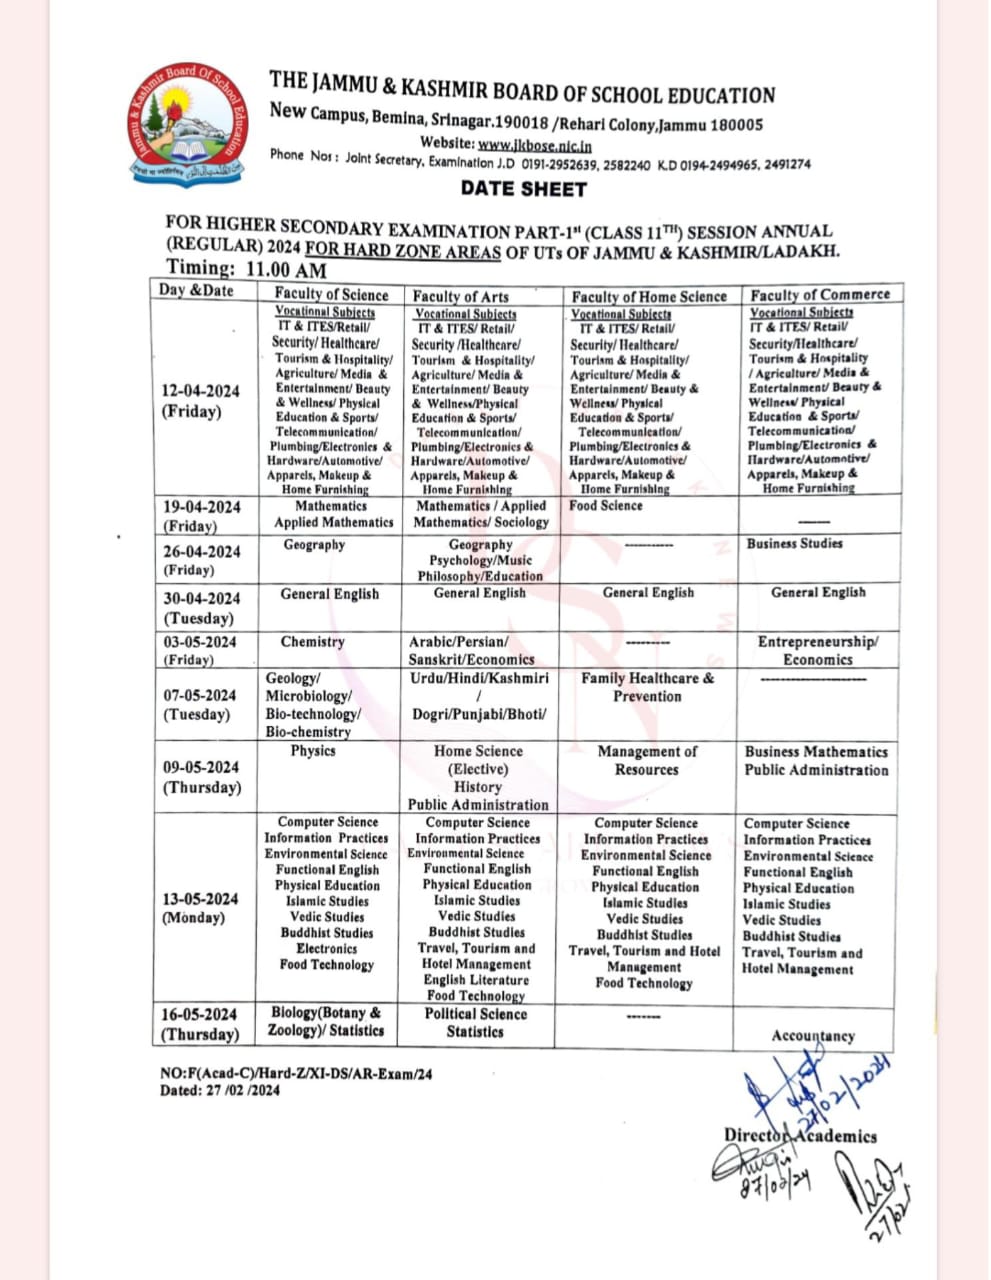 JKBOSE Announces Date Sheet for Annual Exams in Hard Zones of Jammu and Kashmir